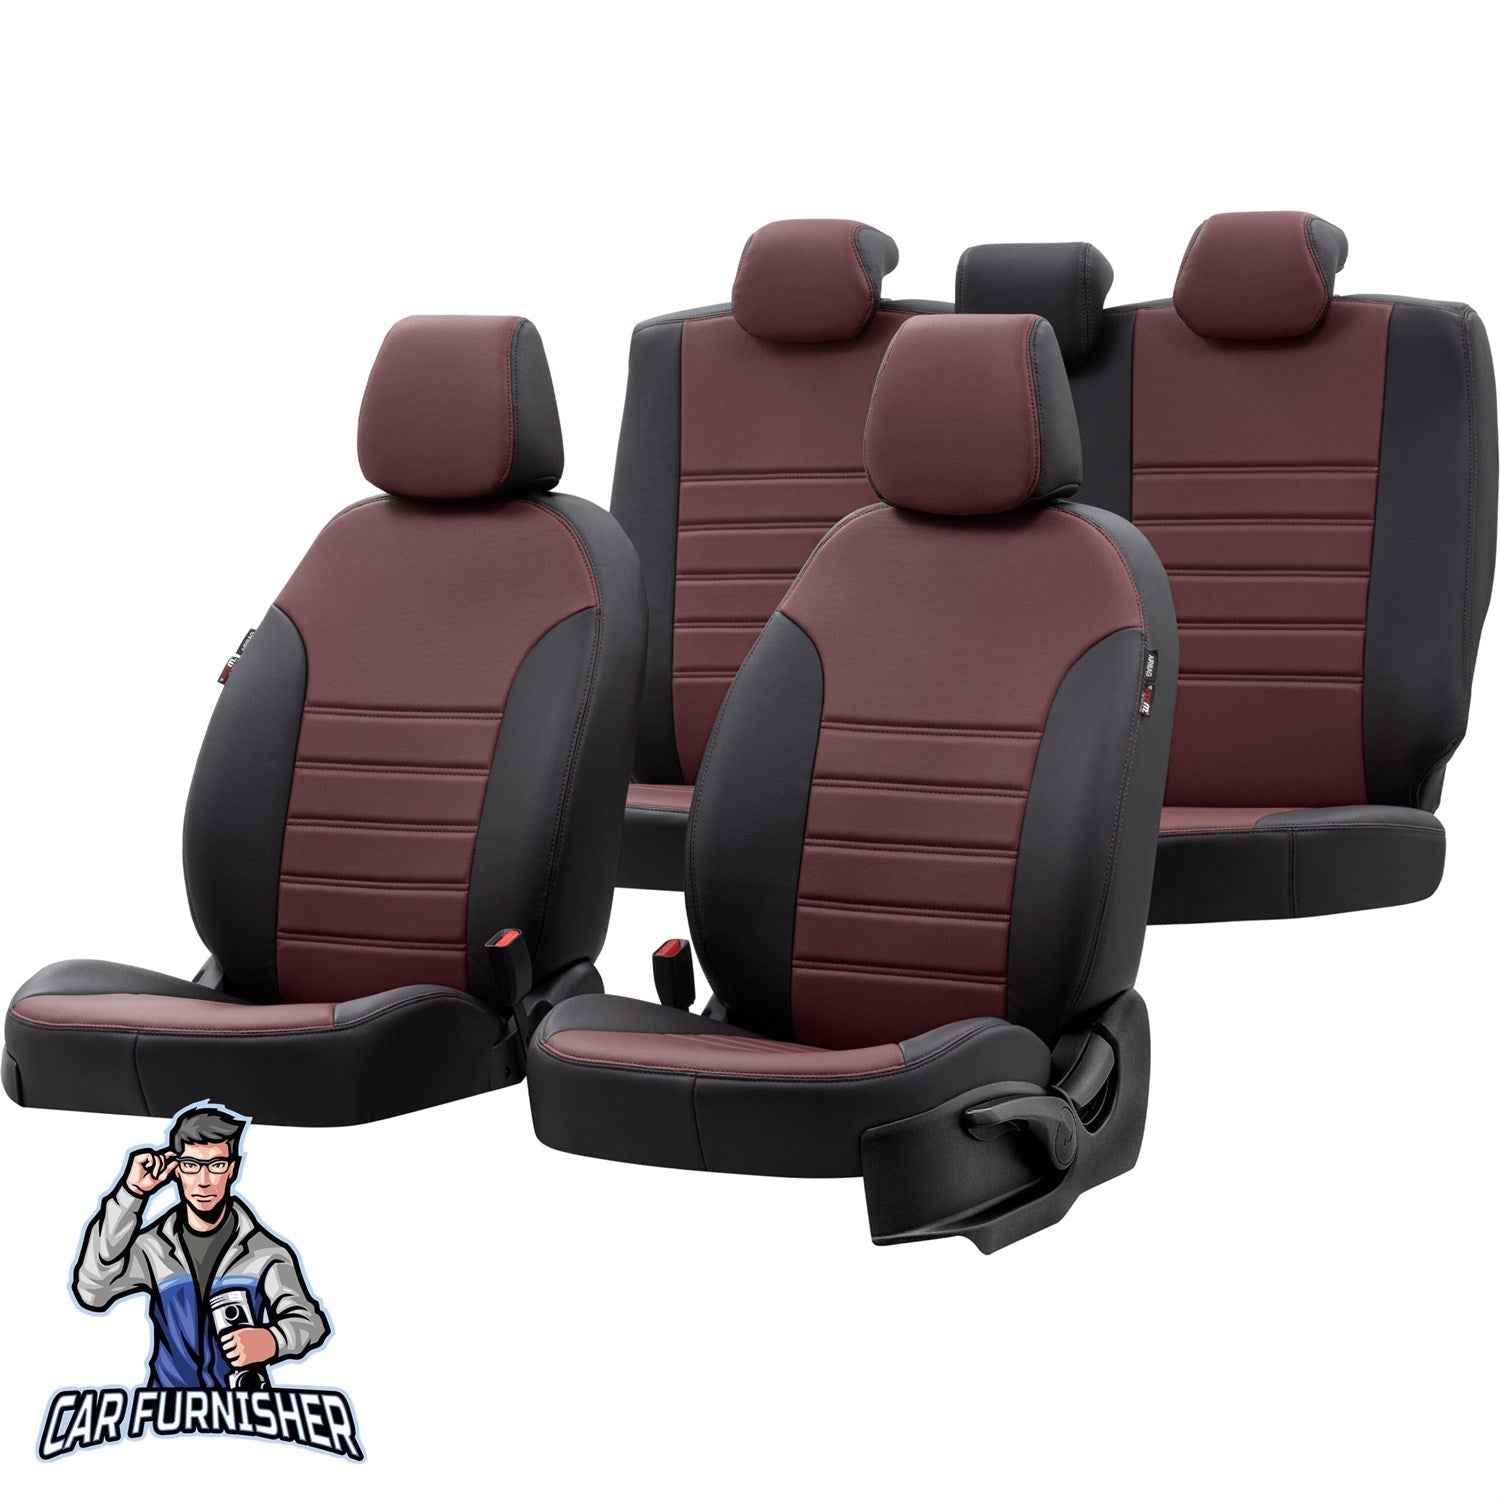 Peugeot Bipper Seat Covers Istanbul Leather Design Burgundy Leather